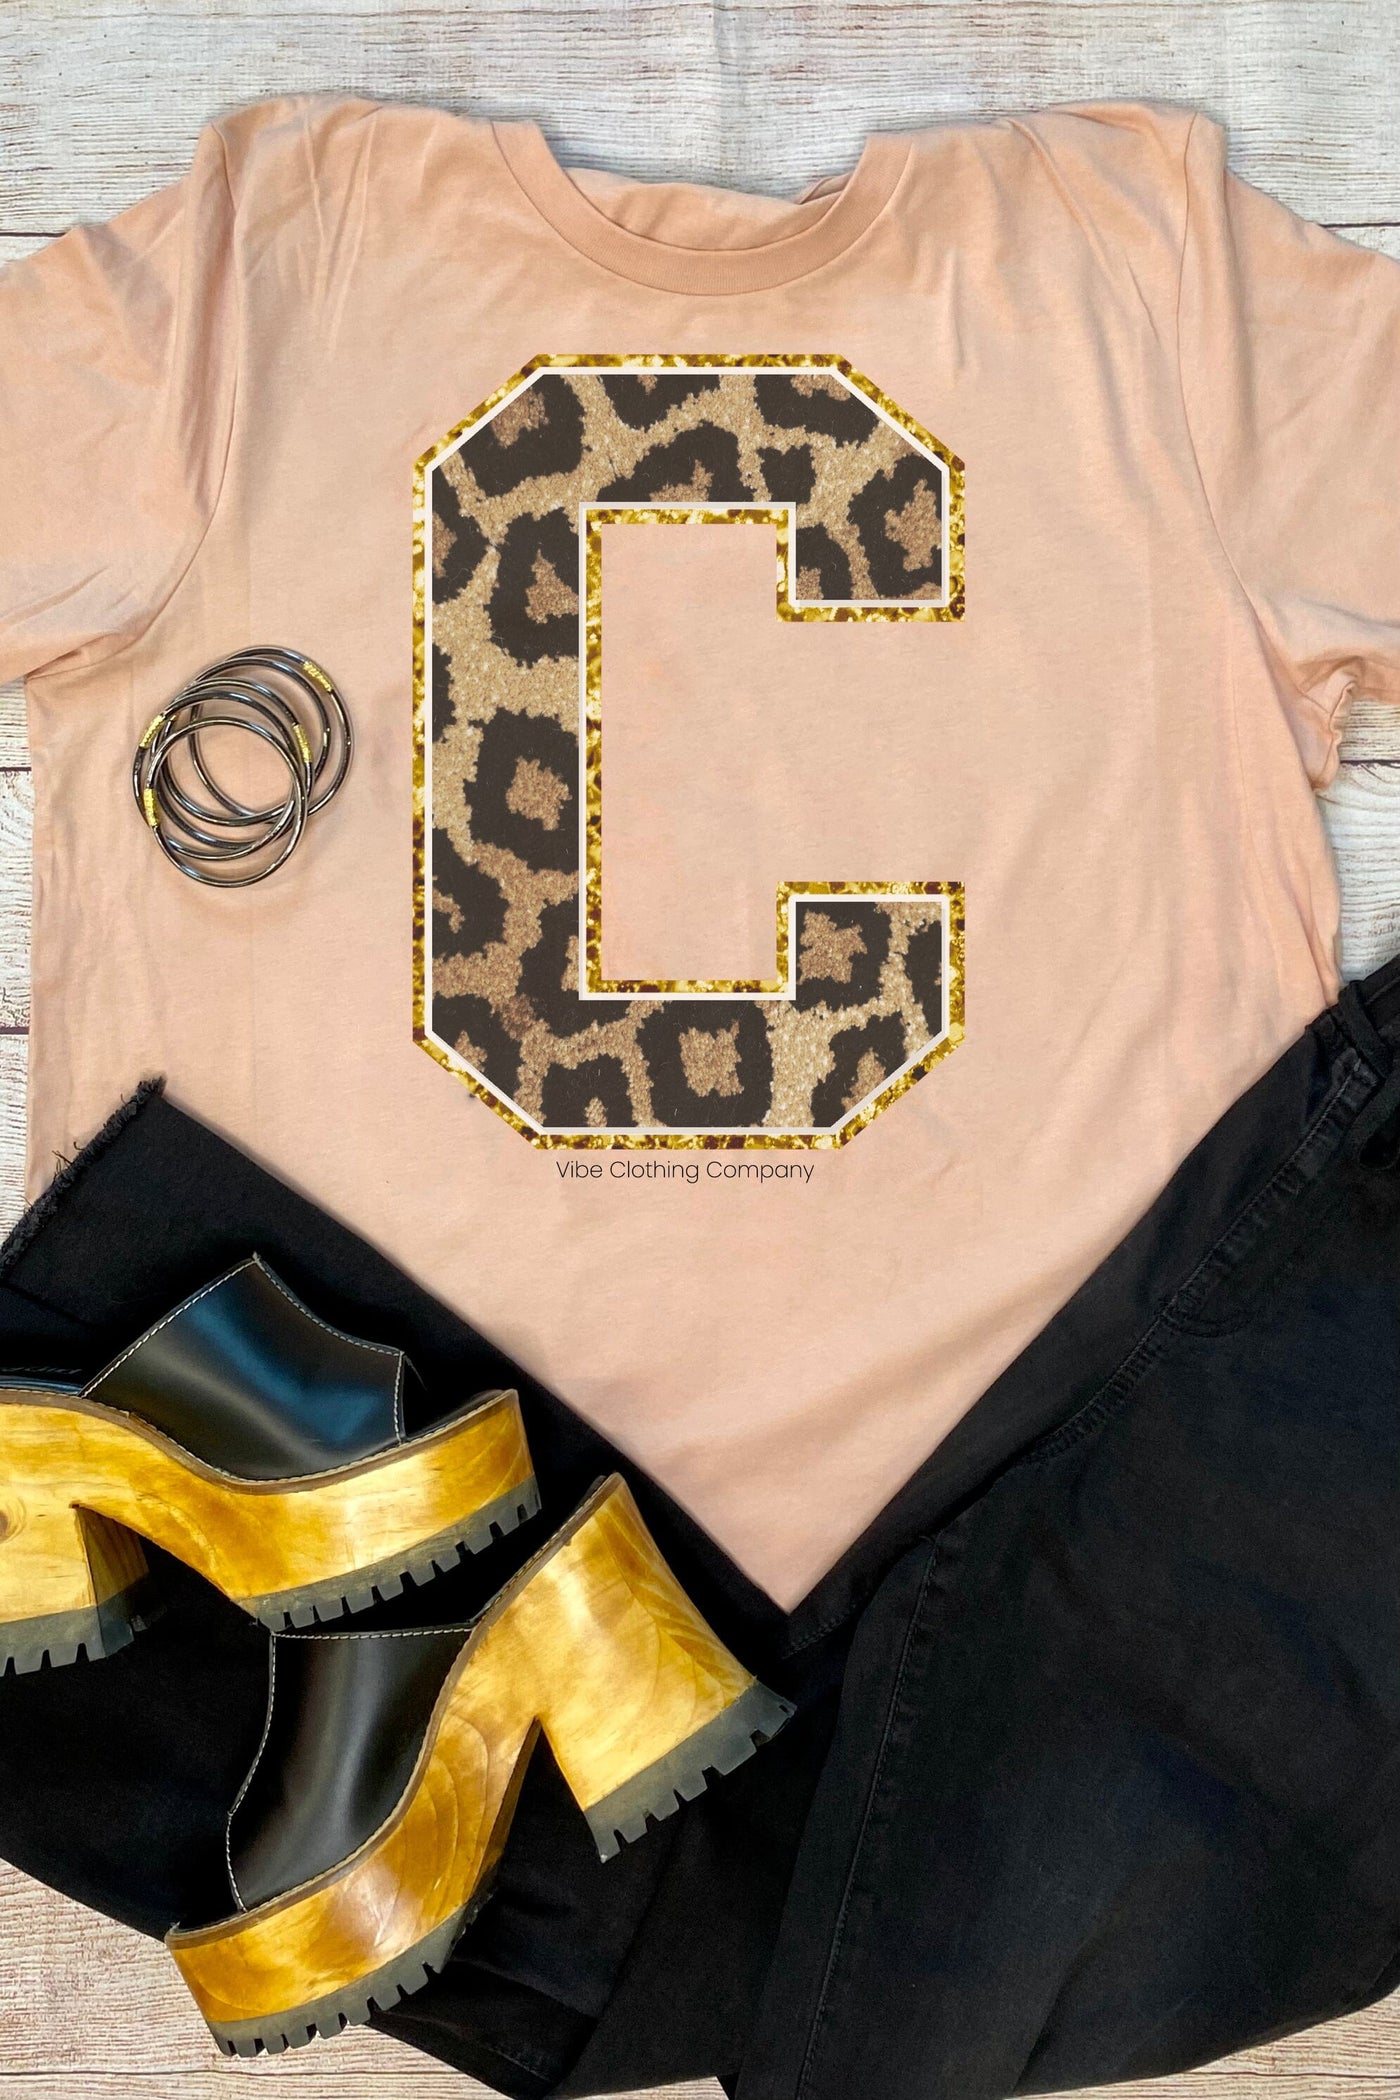 Initials A-M: Blush Graphic Tee graphic tees VCC Small C 